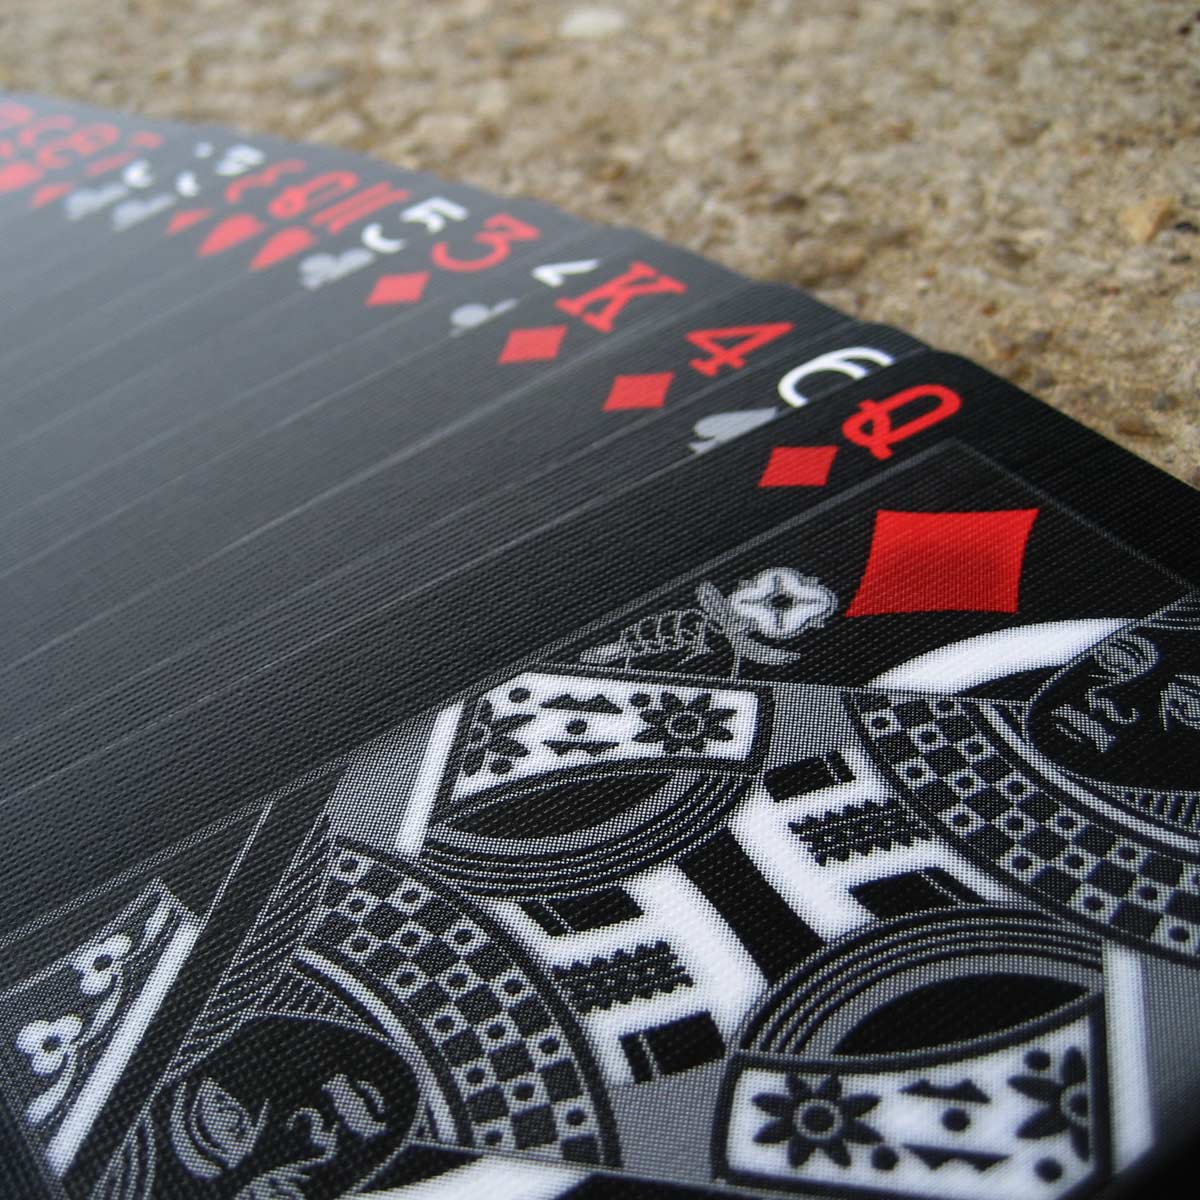 ... card player standard deck of playing cards standard playing card deck